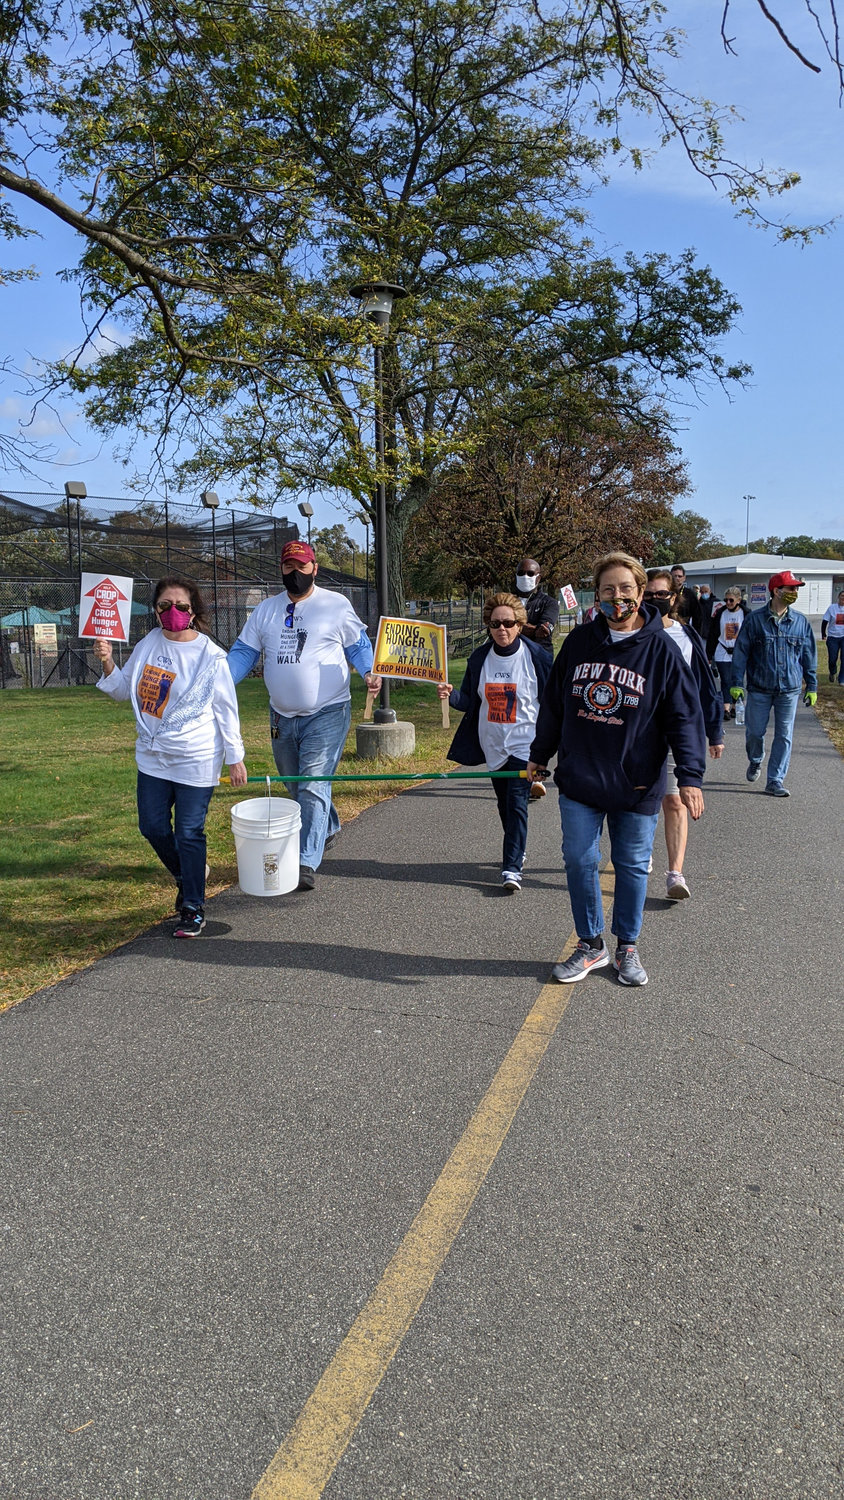 Leaders of the pack: Members of Holy Trinity Orthodox Church in East Meadow in Eisenhower Park last Saturday to raise money for hunger issues at home and overseas.